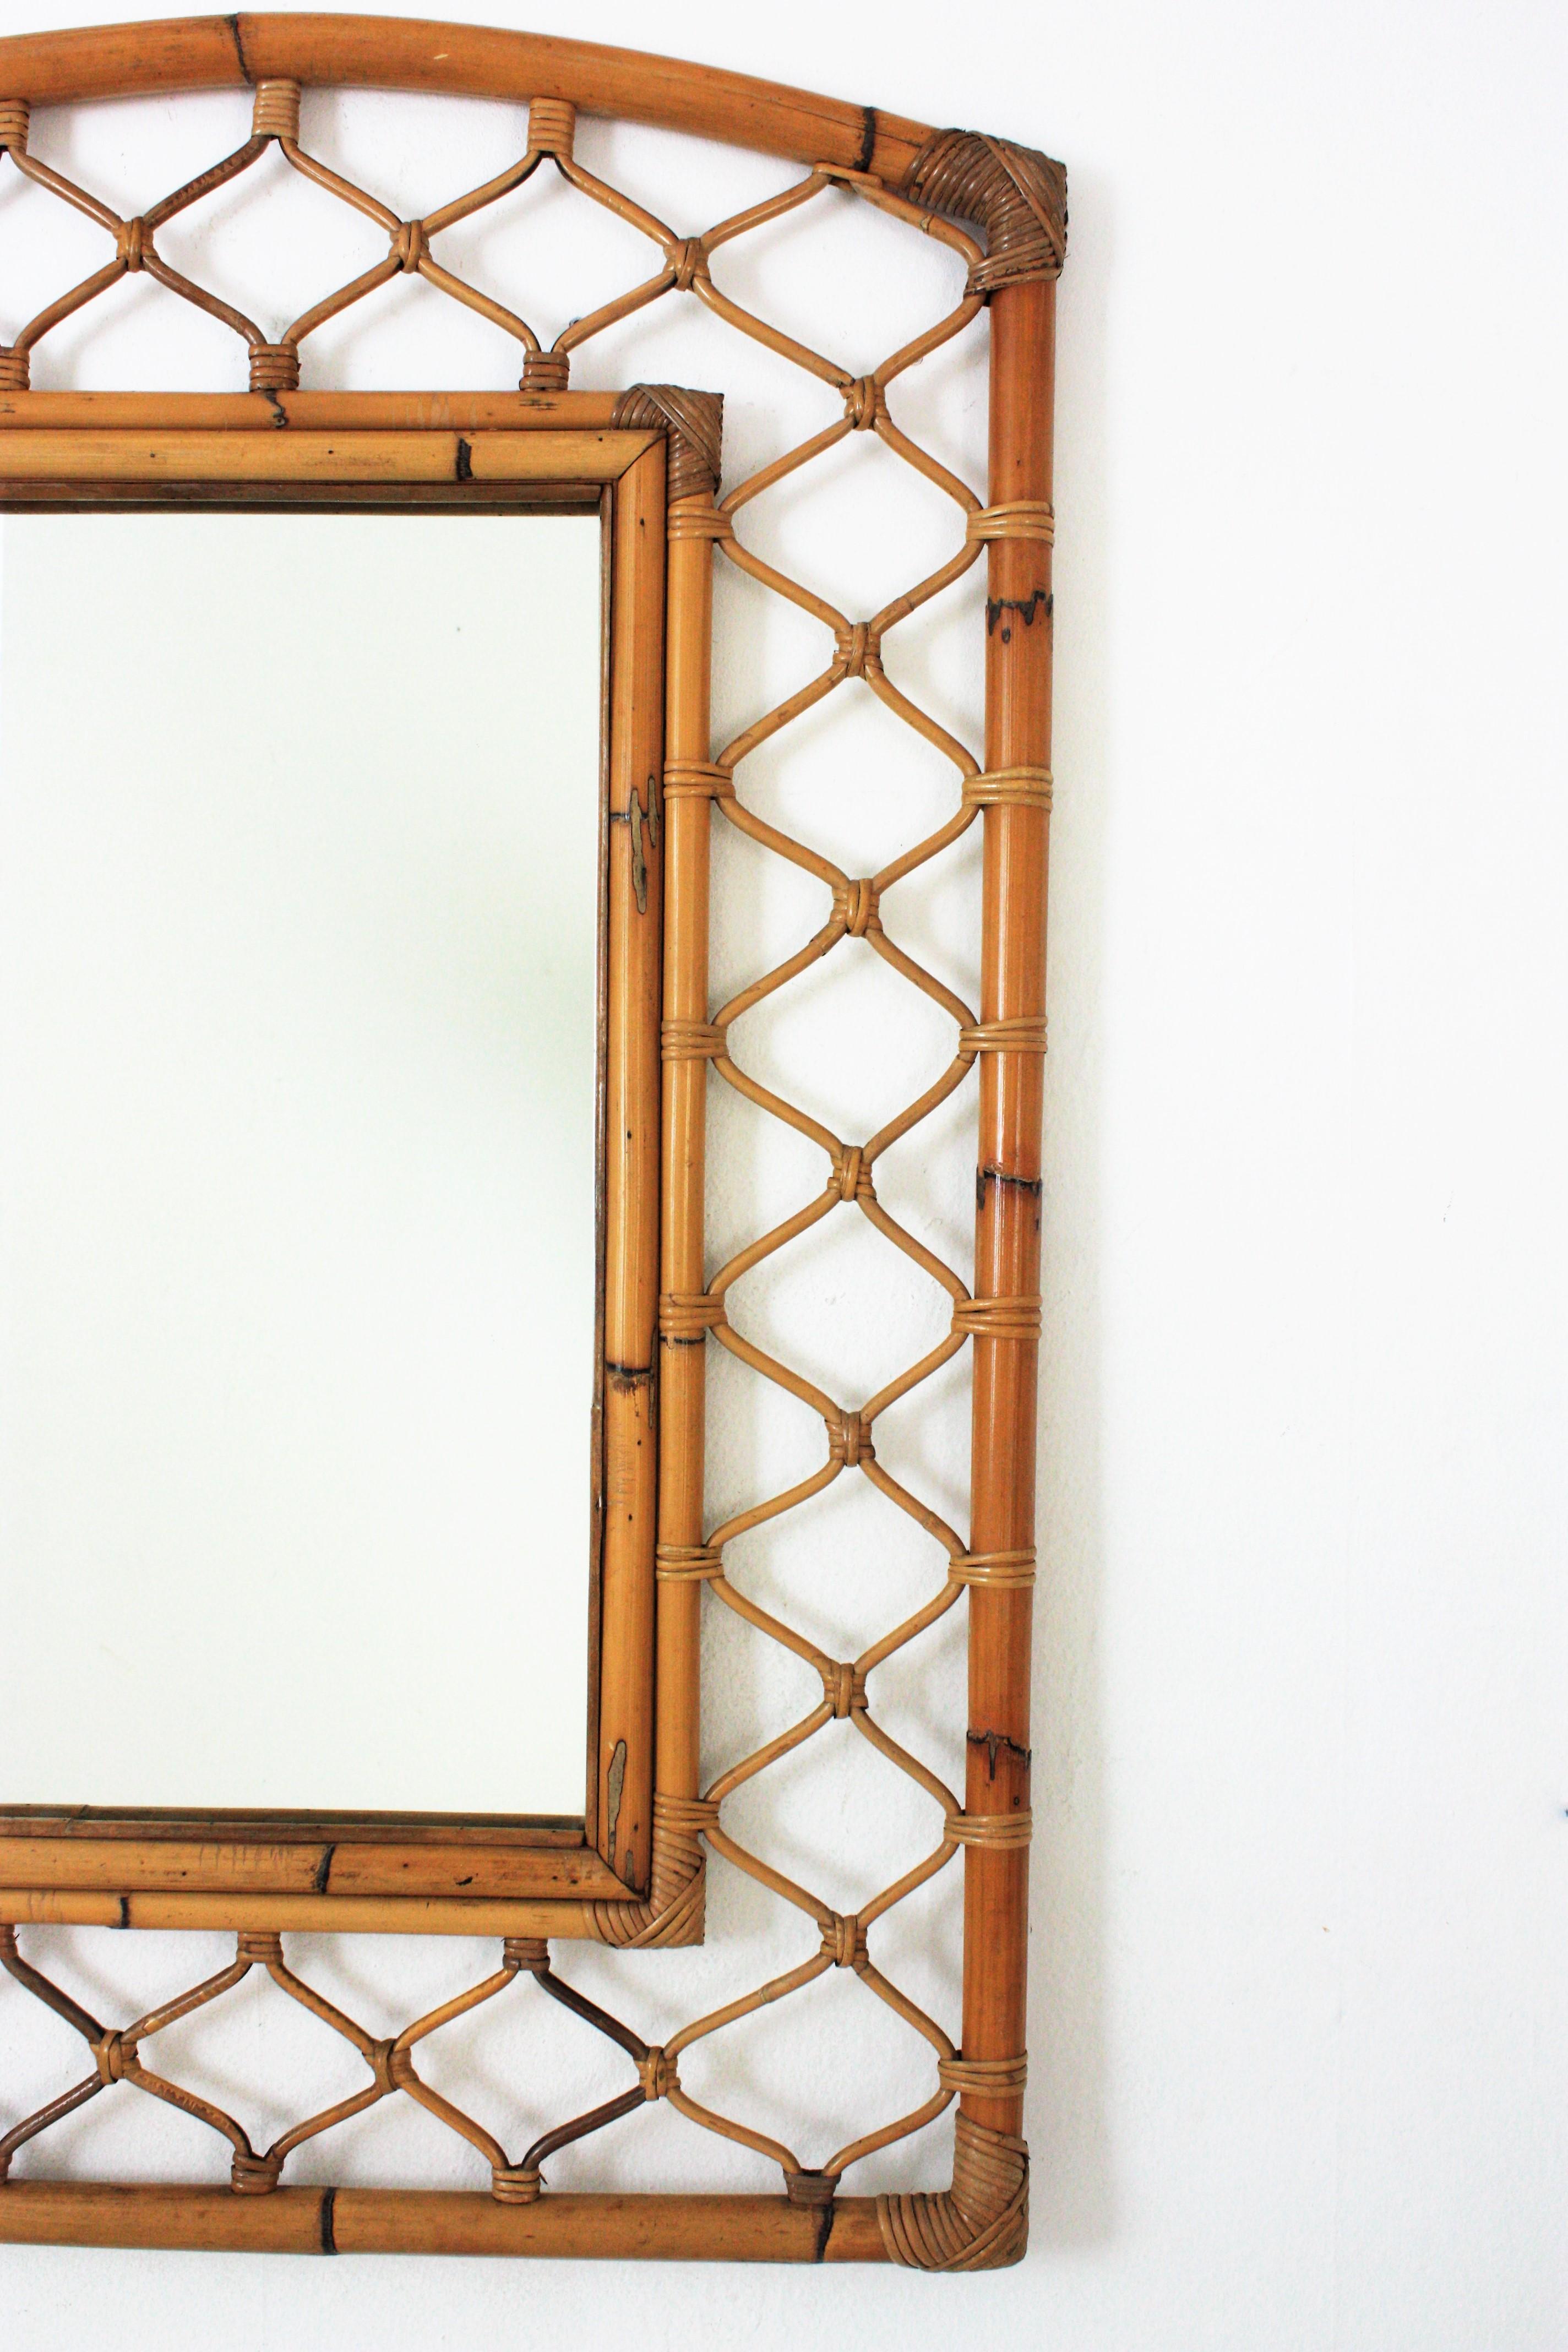 Spanish Rattan Bamboo Rectangular Large Mirror with Grid Frame, 1960s For Sale